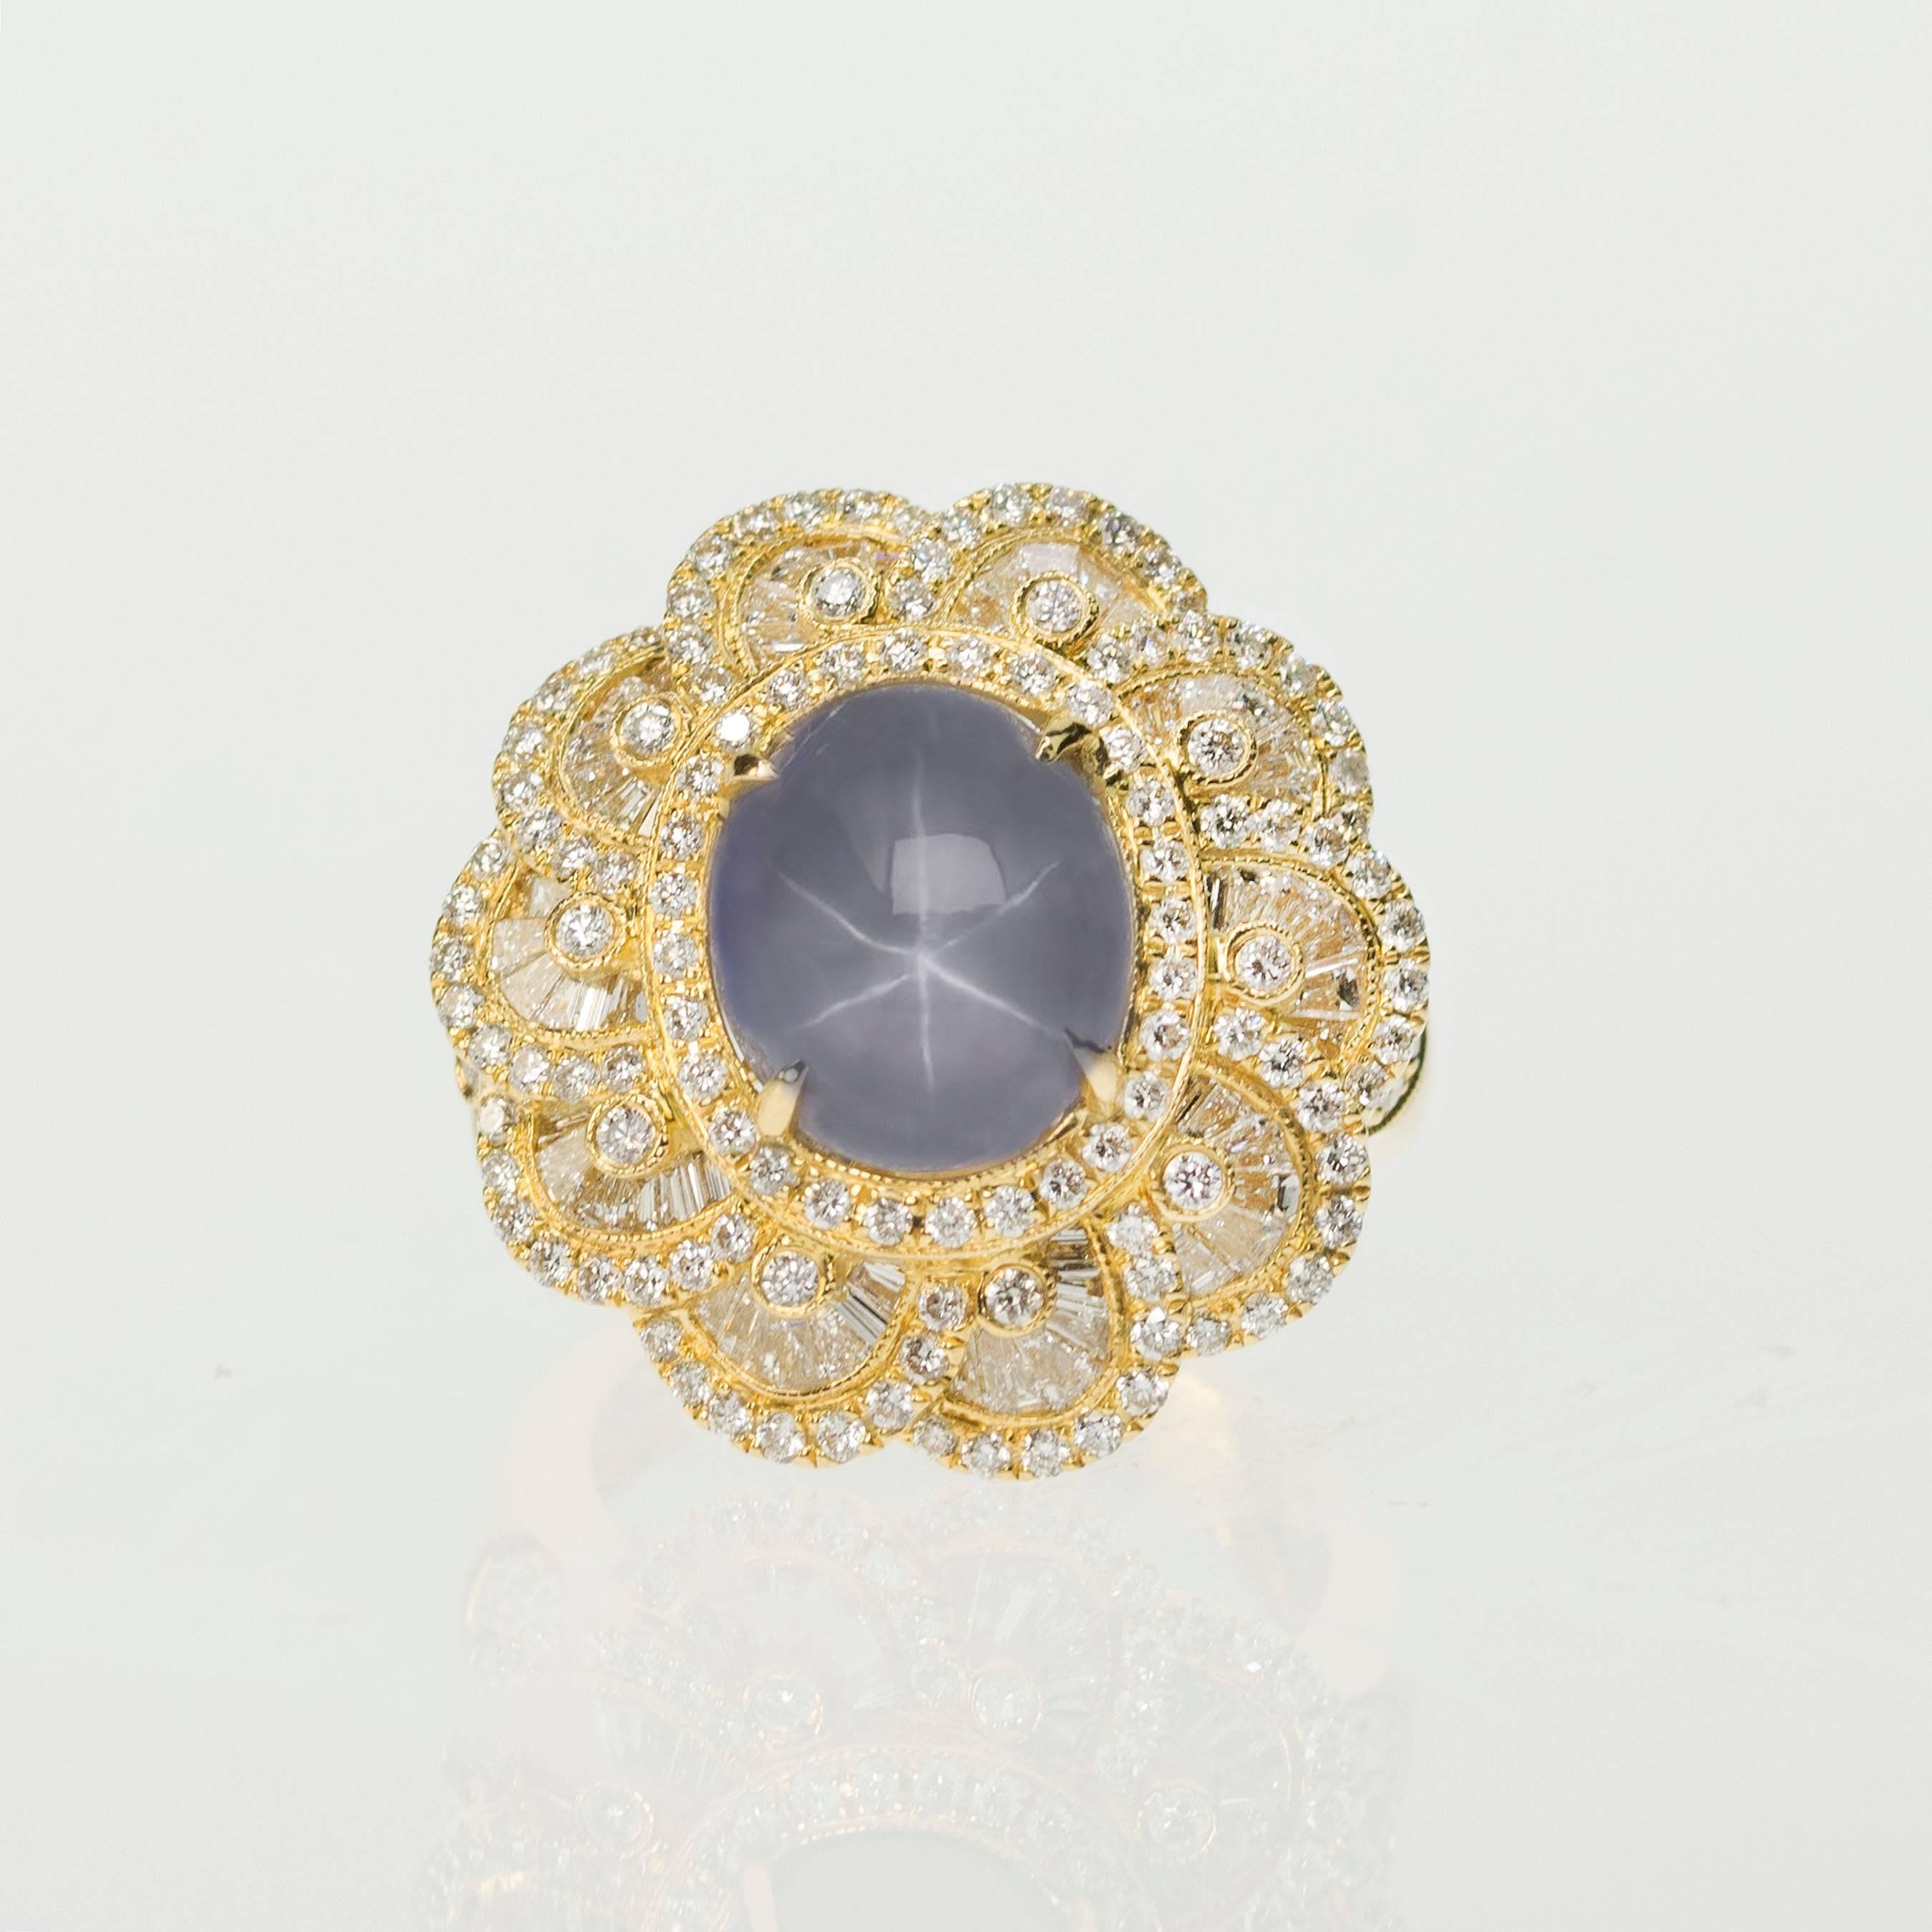 18k Ring with one 8.32 carat star sapphire and approximately 3 carats of fine diamonds.